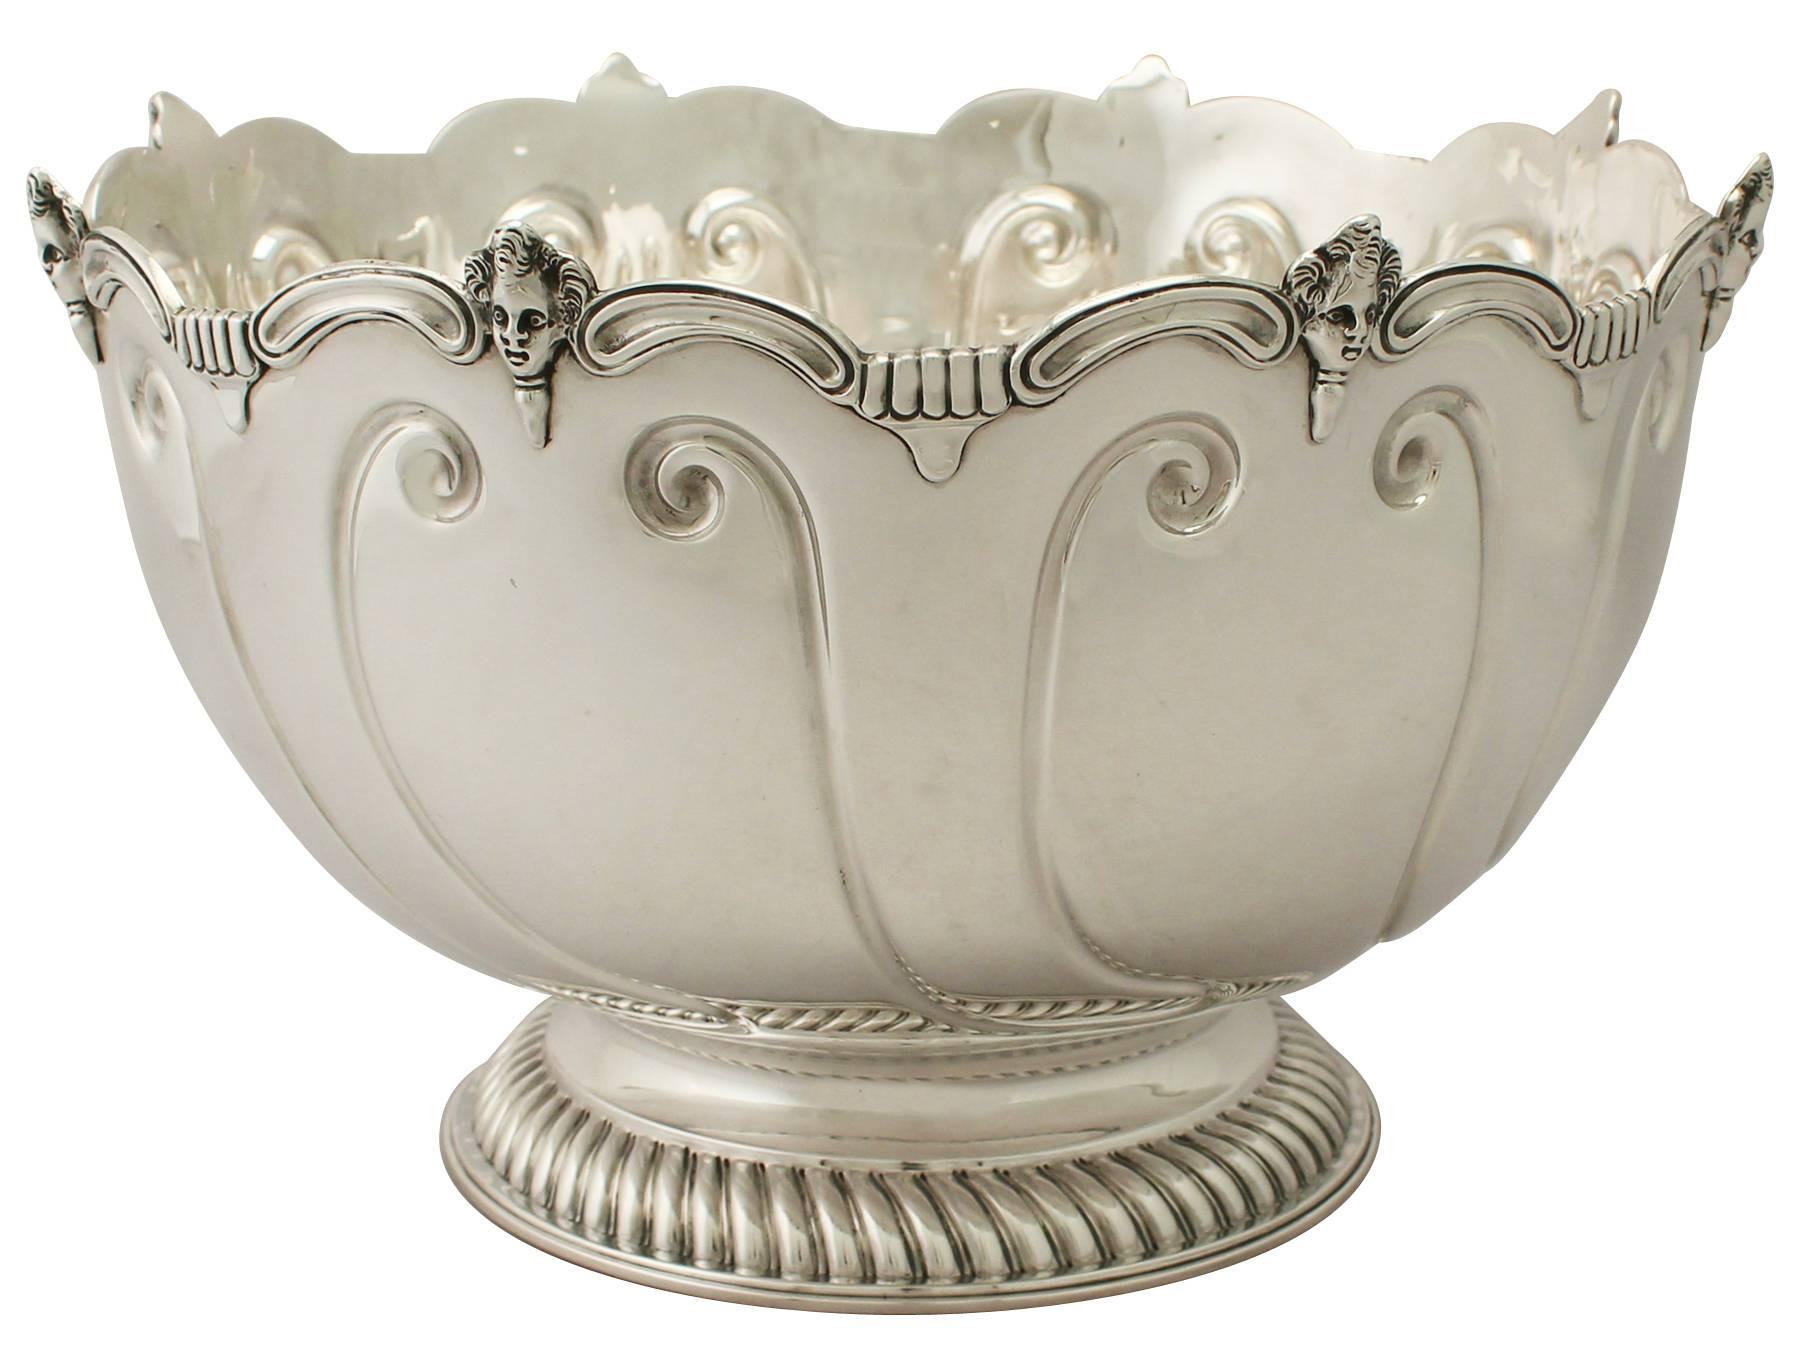 A magnificent, fine and impressive, large antique Edwardian English sterling silver Monteith style presentation bowl made by Charles Stuart Harris; an addition to our ornamental silverware collection.

This magnificent antique Edwardian sterling